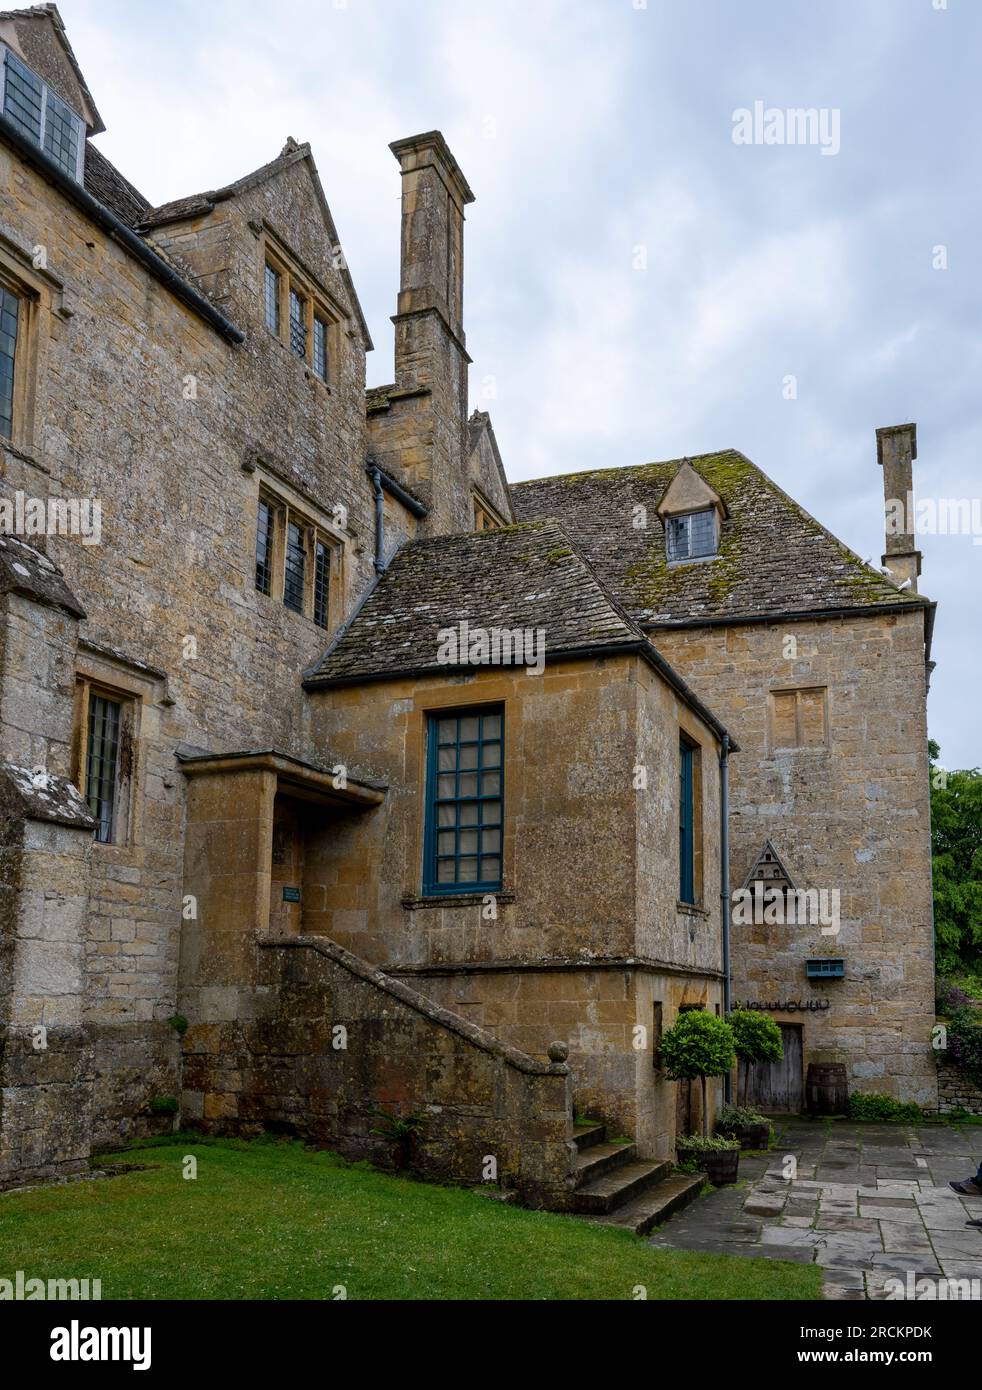 Snowshill Manor, Snowshill, Cotswolds, Gloucestershire, England, UK - view of exterior of the manor house Stock Photo